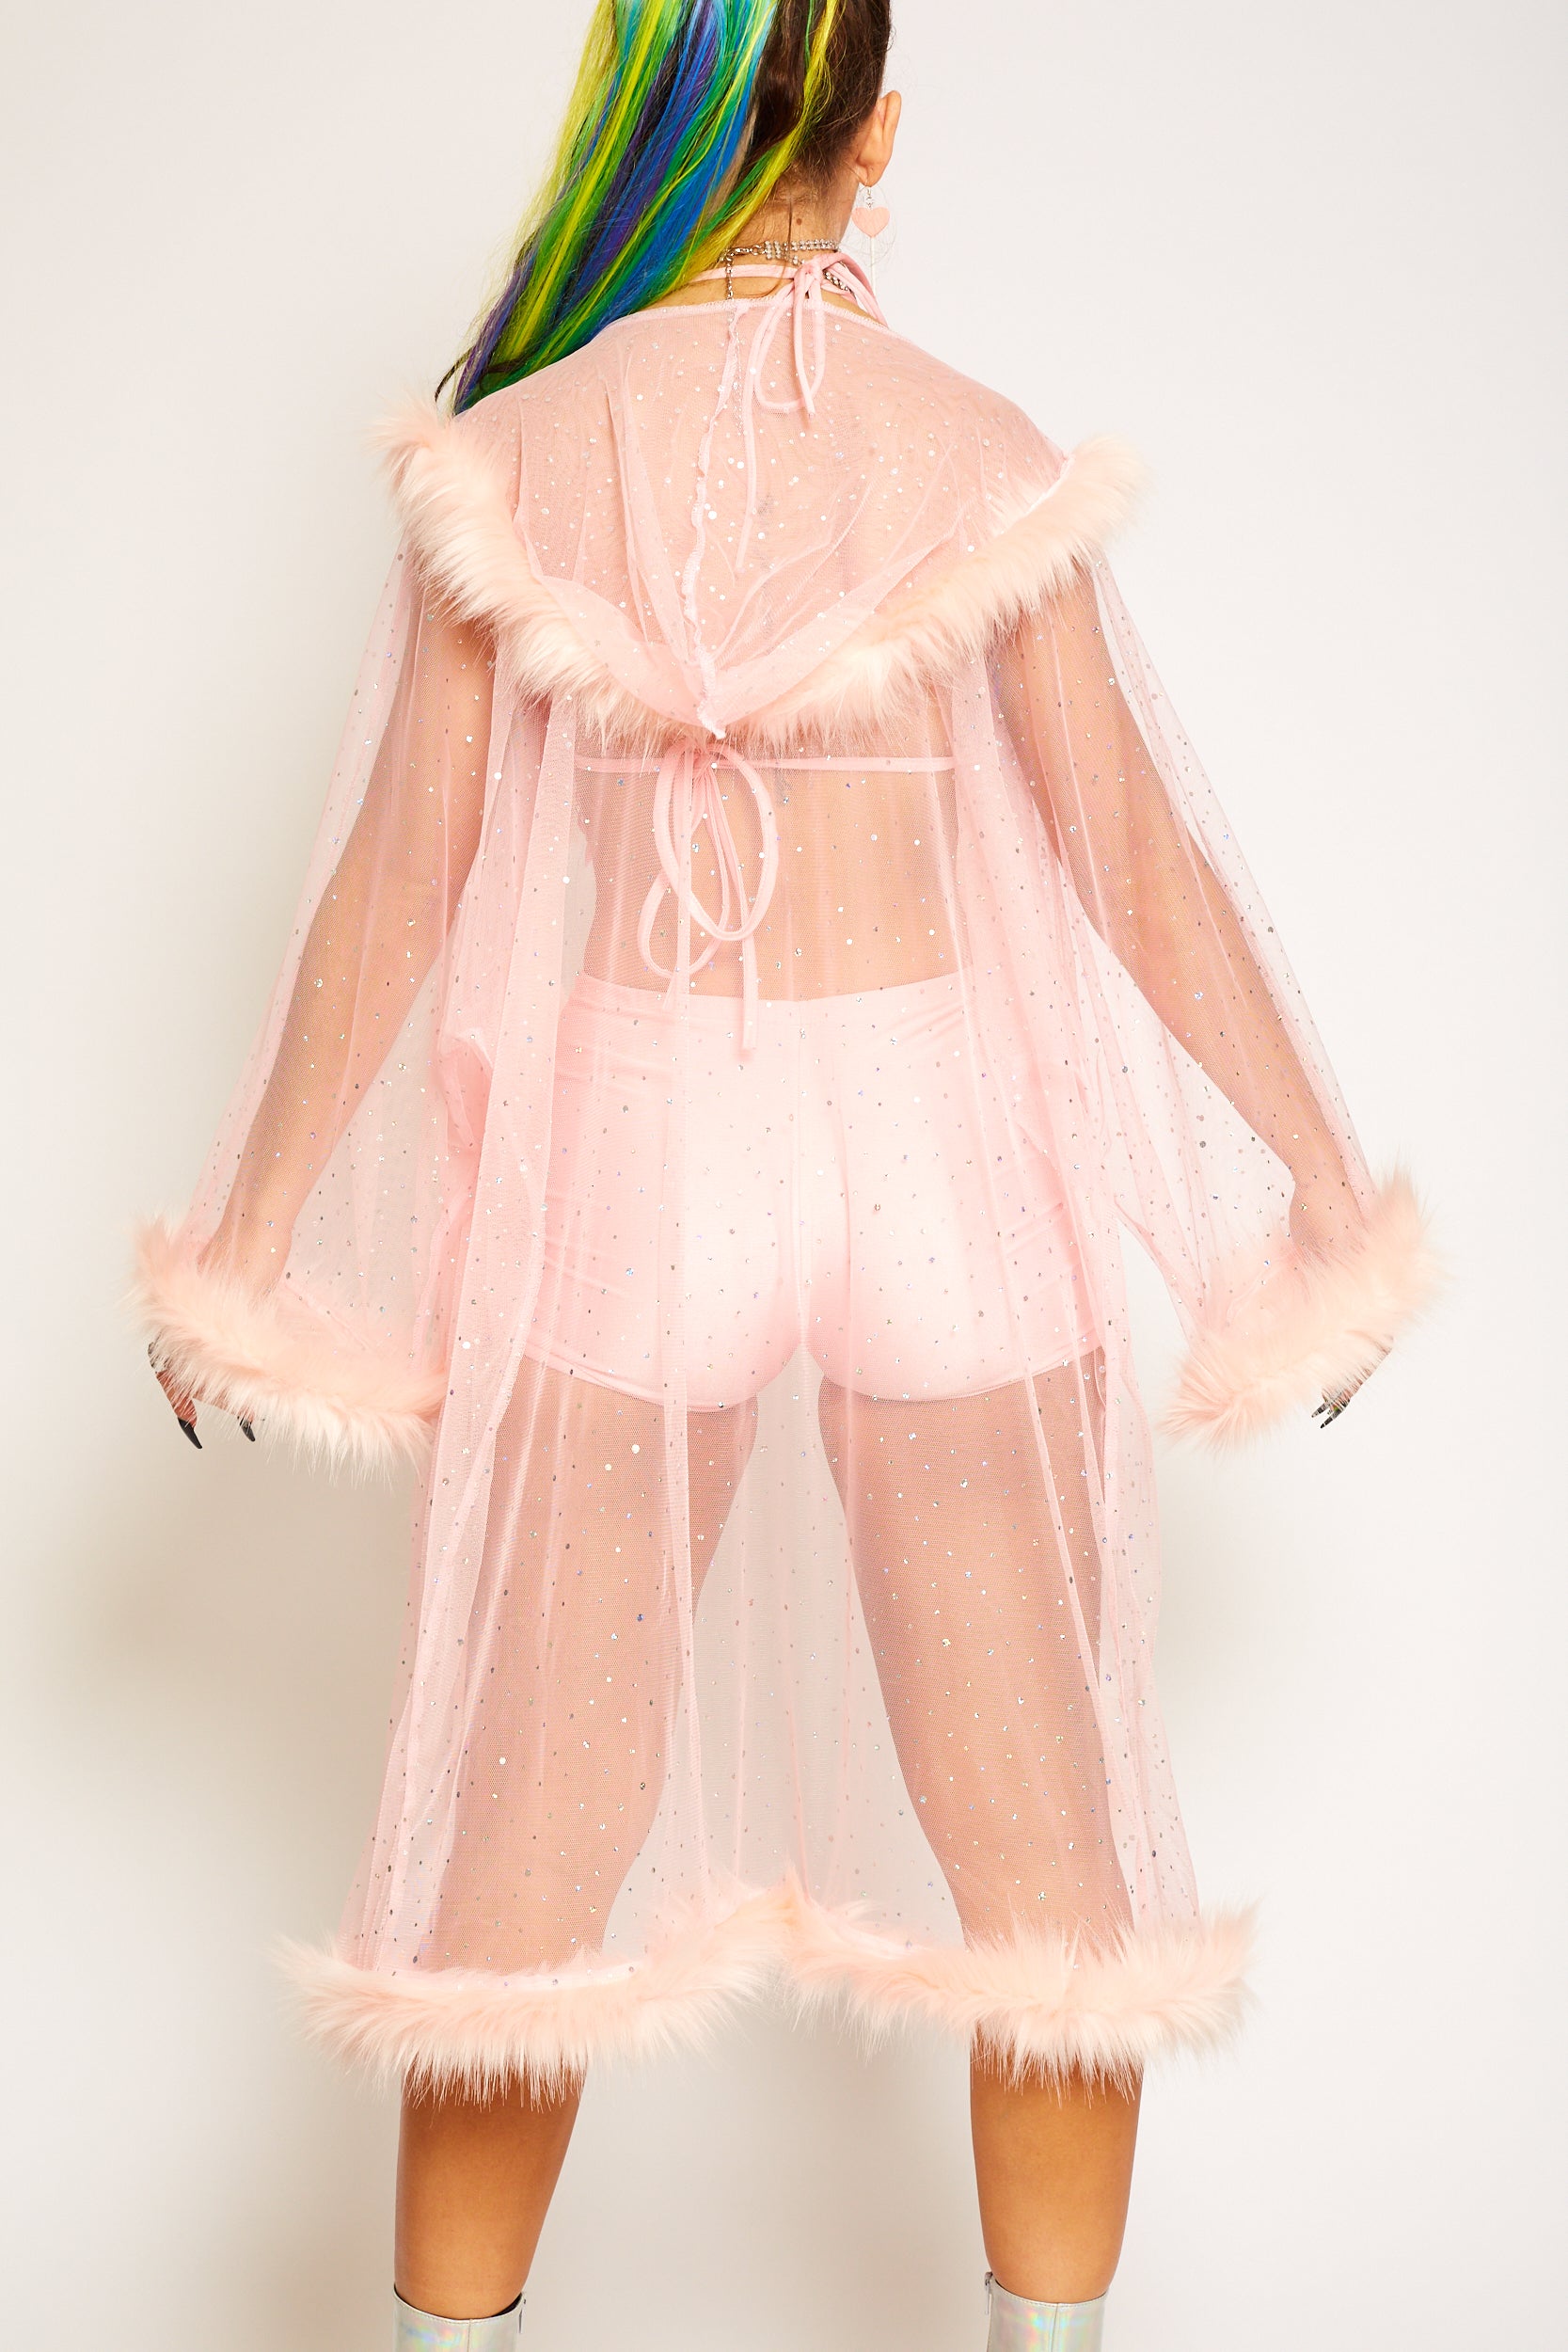 pink sequin fur fluffy kimono jacket festival outfit fashion doof rave 